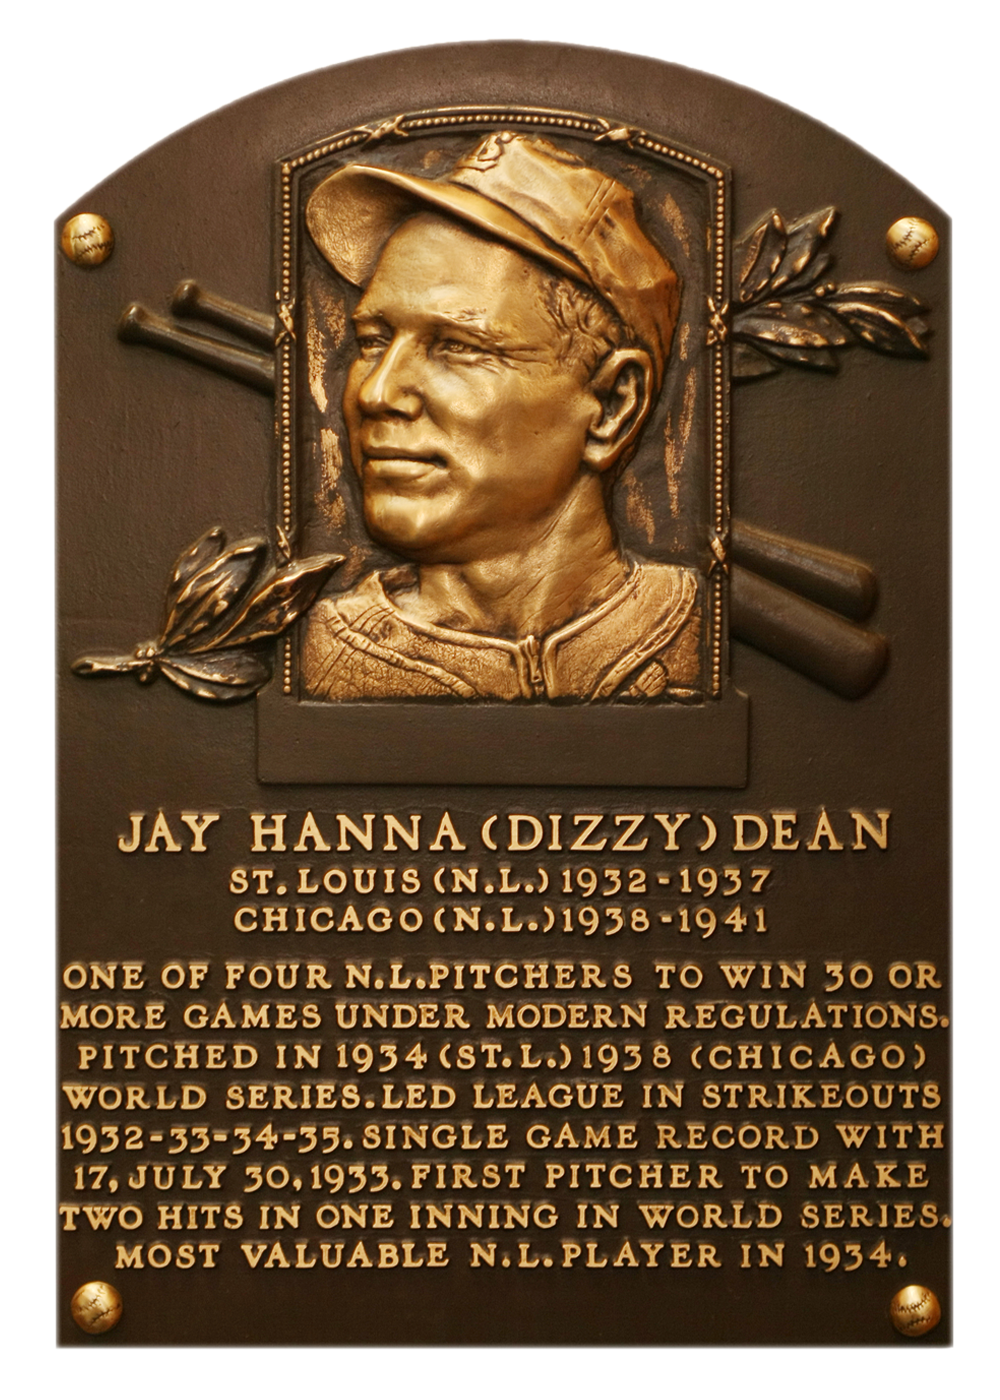 Dizzy Dean Hall of Fame plaque